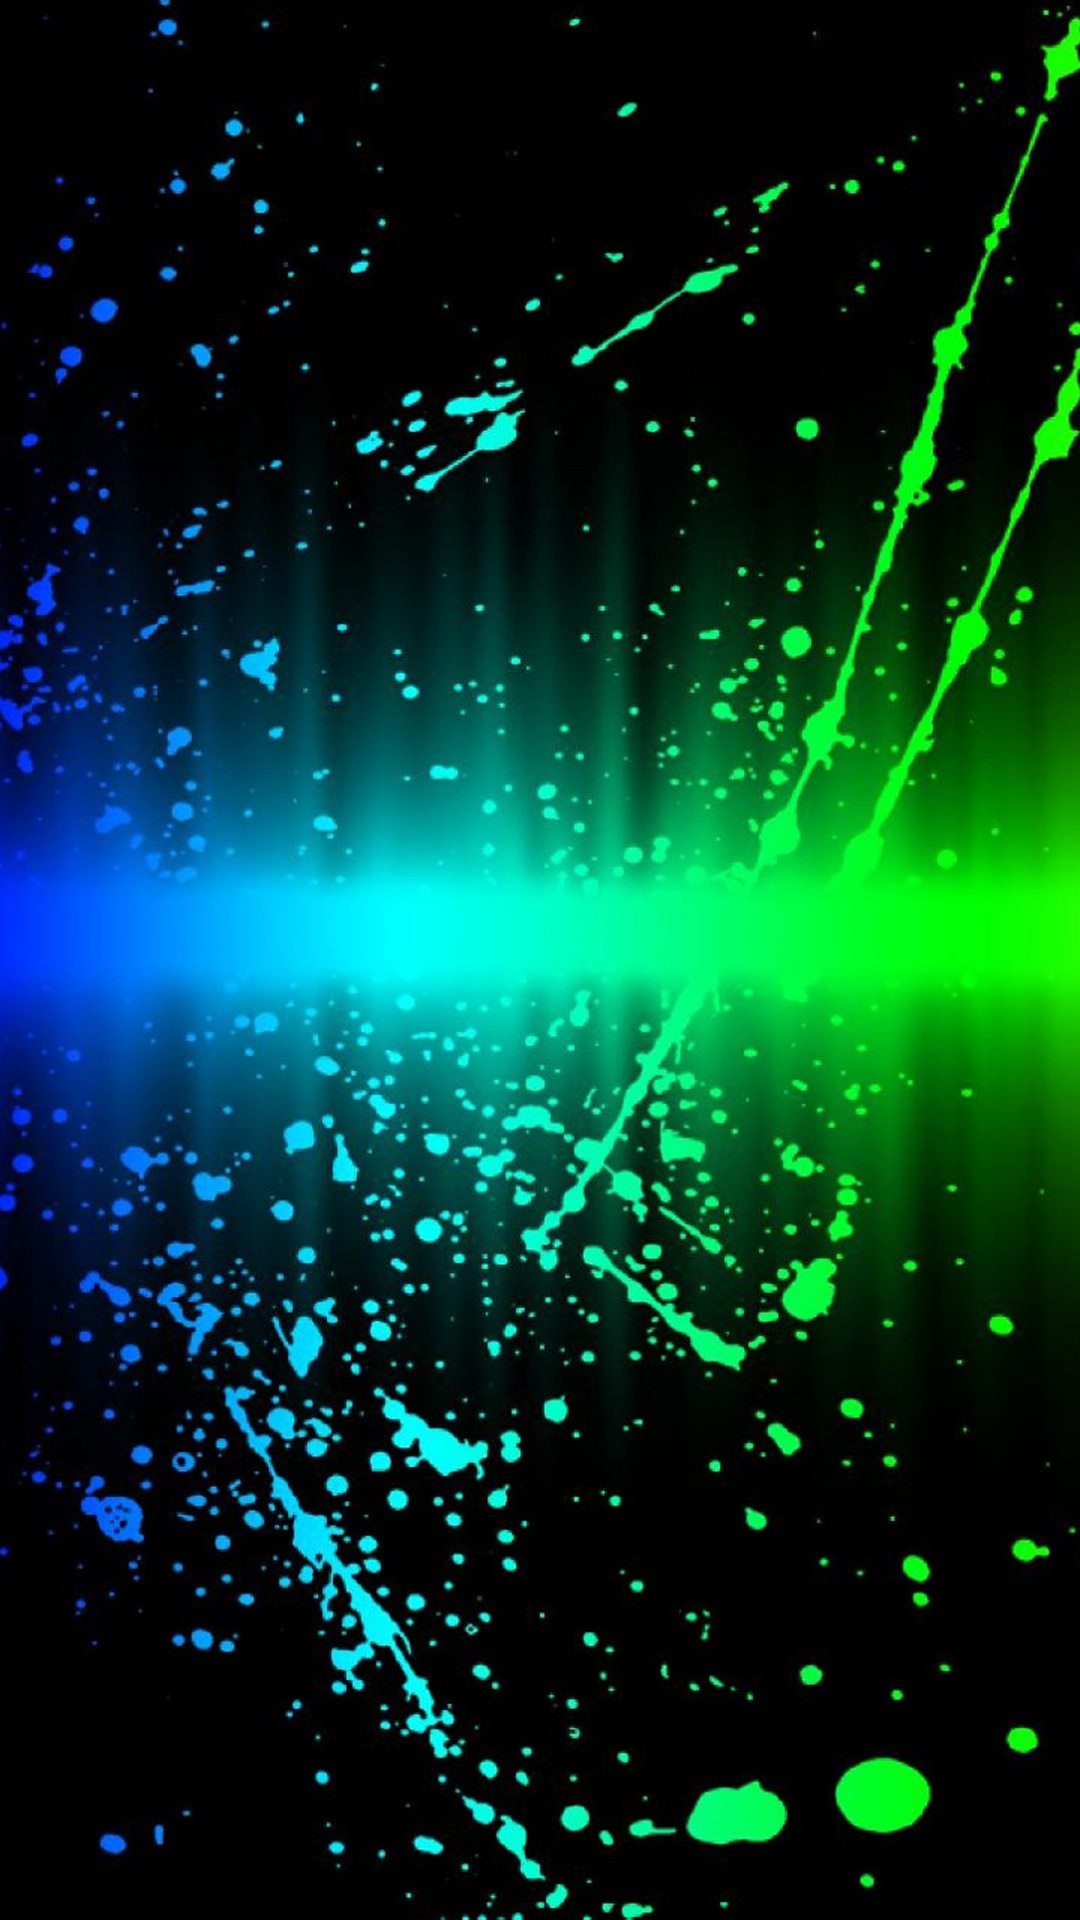 Abstract Blue And Green Neon Wallpaper Data Src W Full 6 1 9 497891 Blue And Green